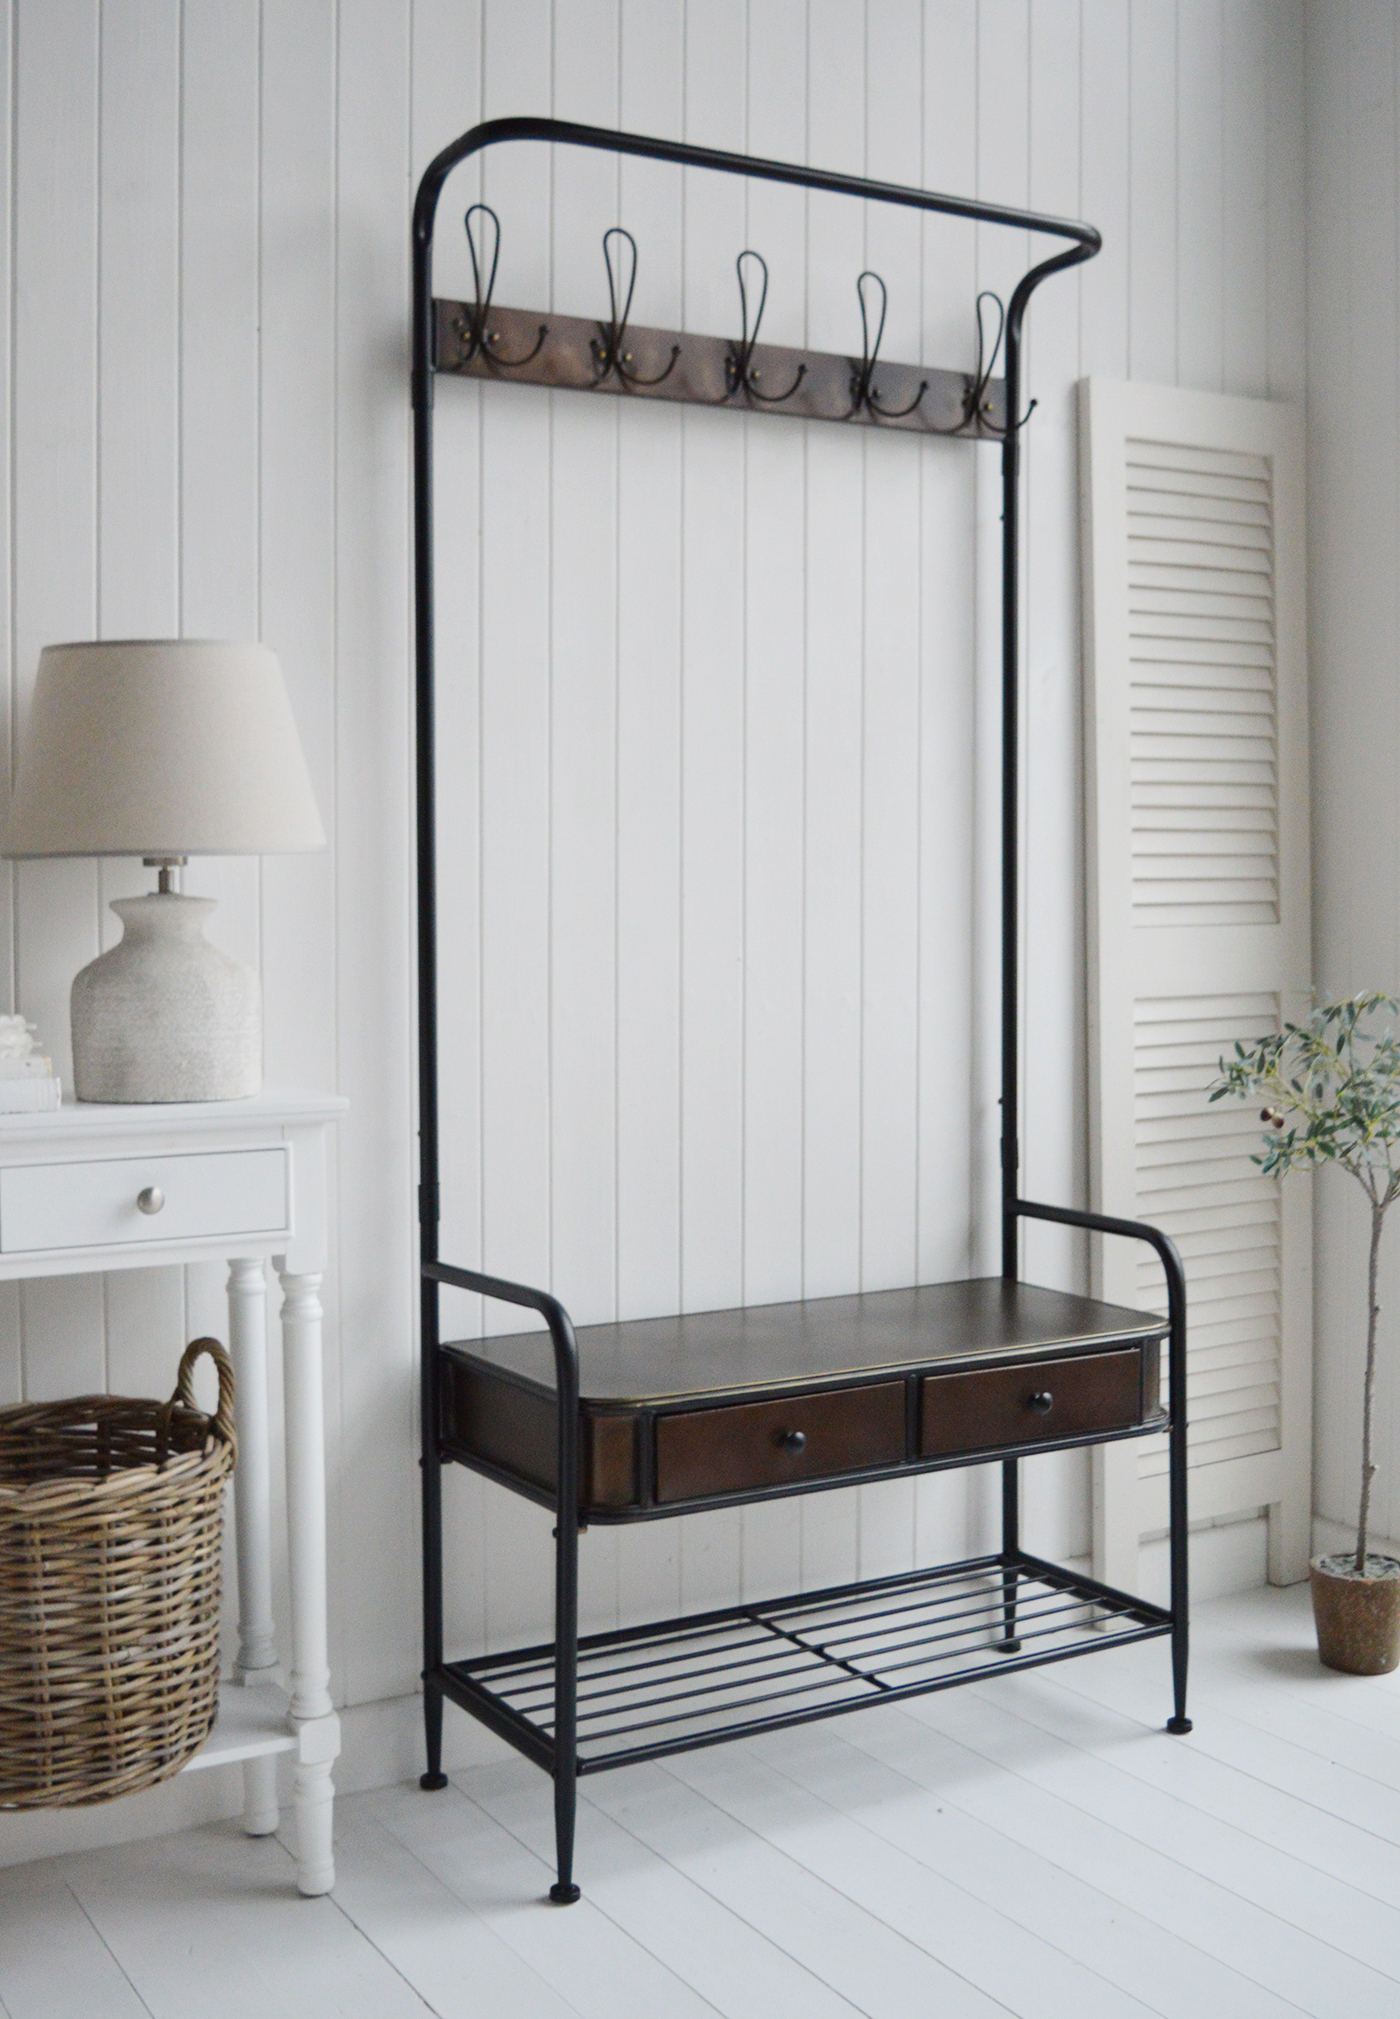 Windsor Hallway Stand - Bench Seat, shelf and Coat Rack for complete Hall Entry Way in antiqued black metal for modern farmhouse, coastal and country New England Interiors . Photo from the side to show the complet size